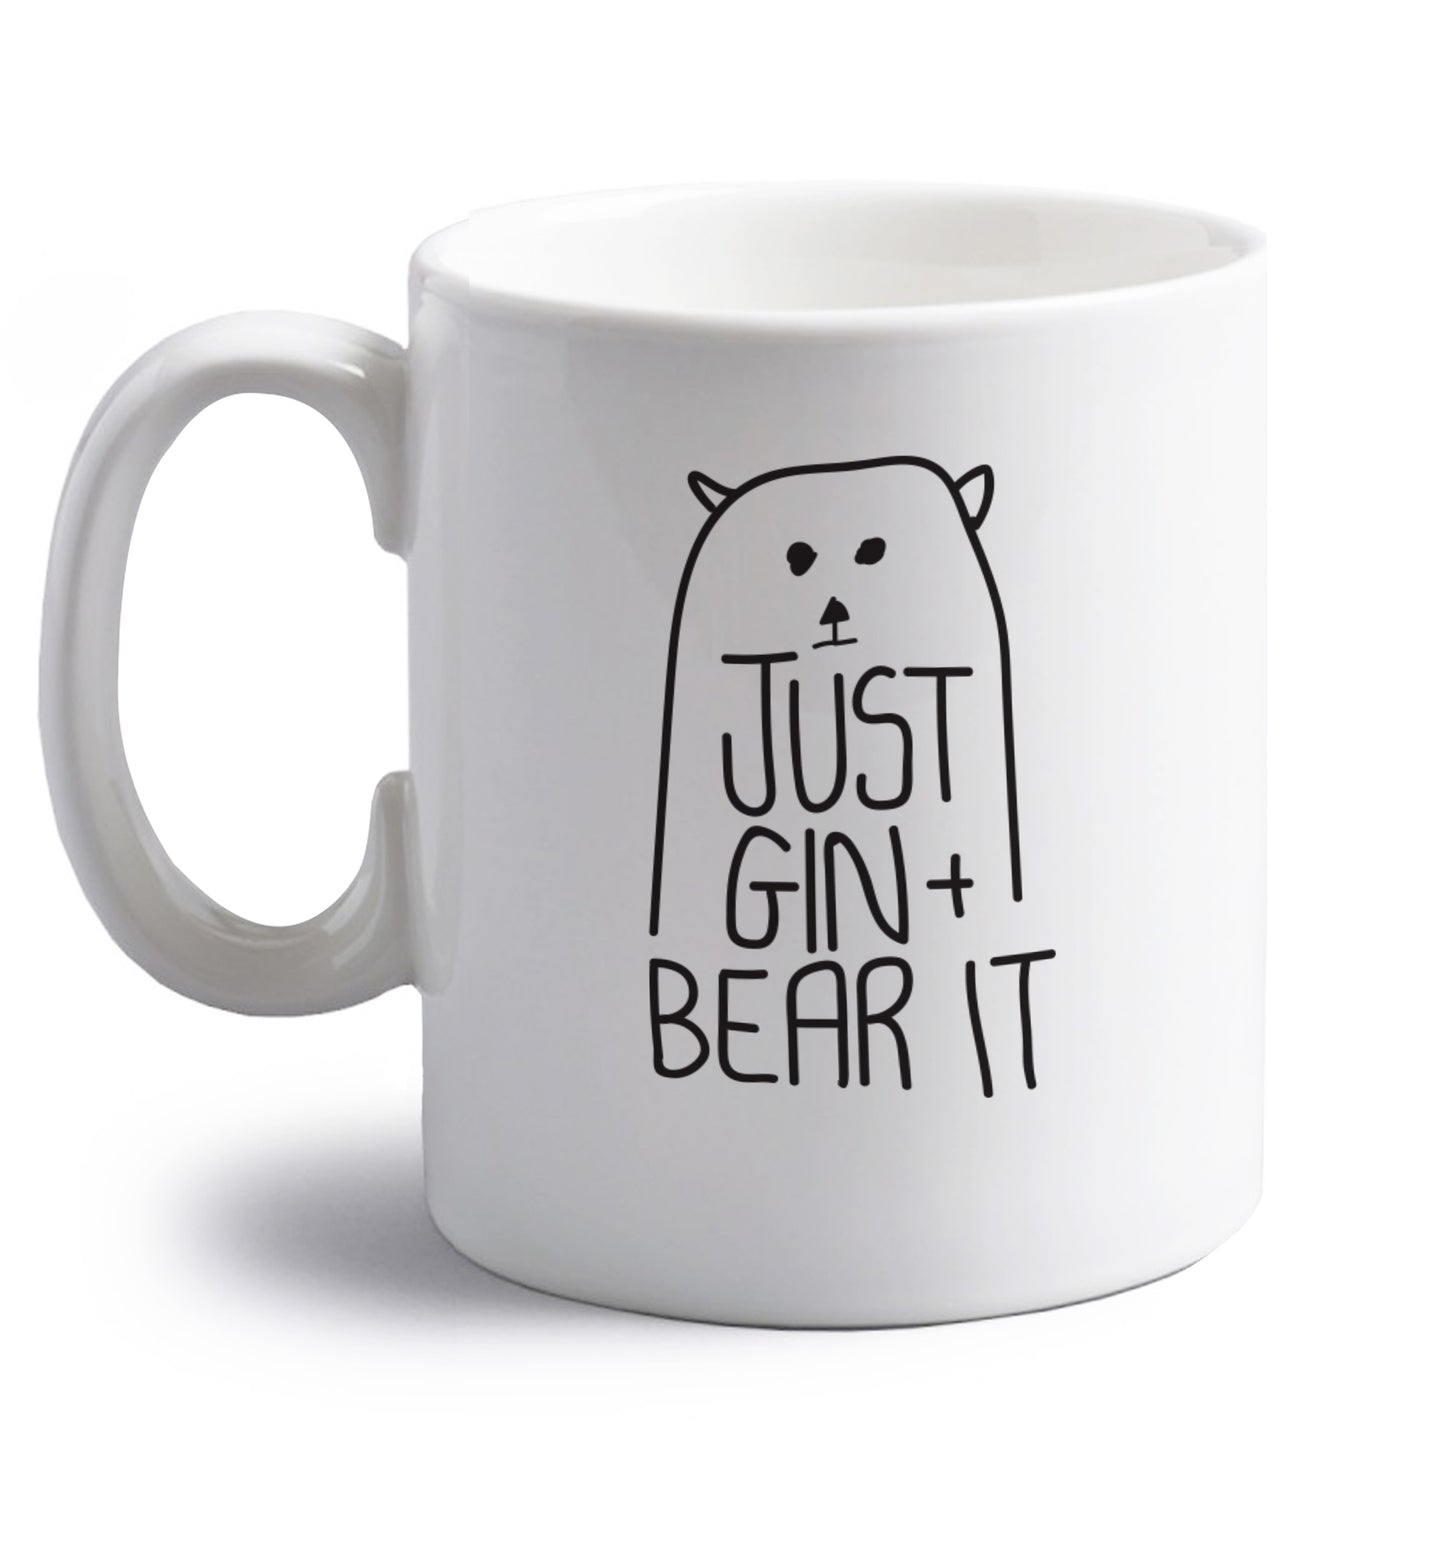 Just gin and bear it right handed white ceramic mug 